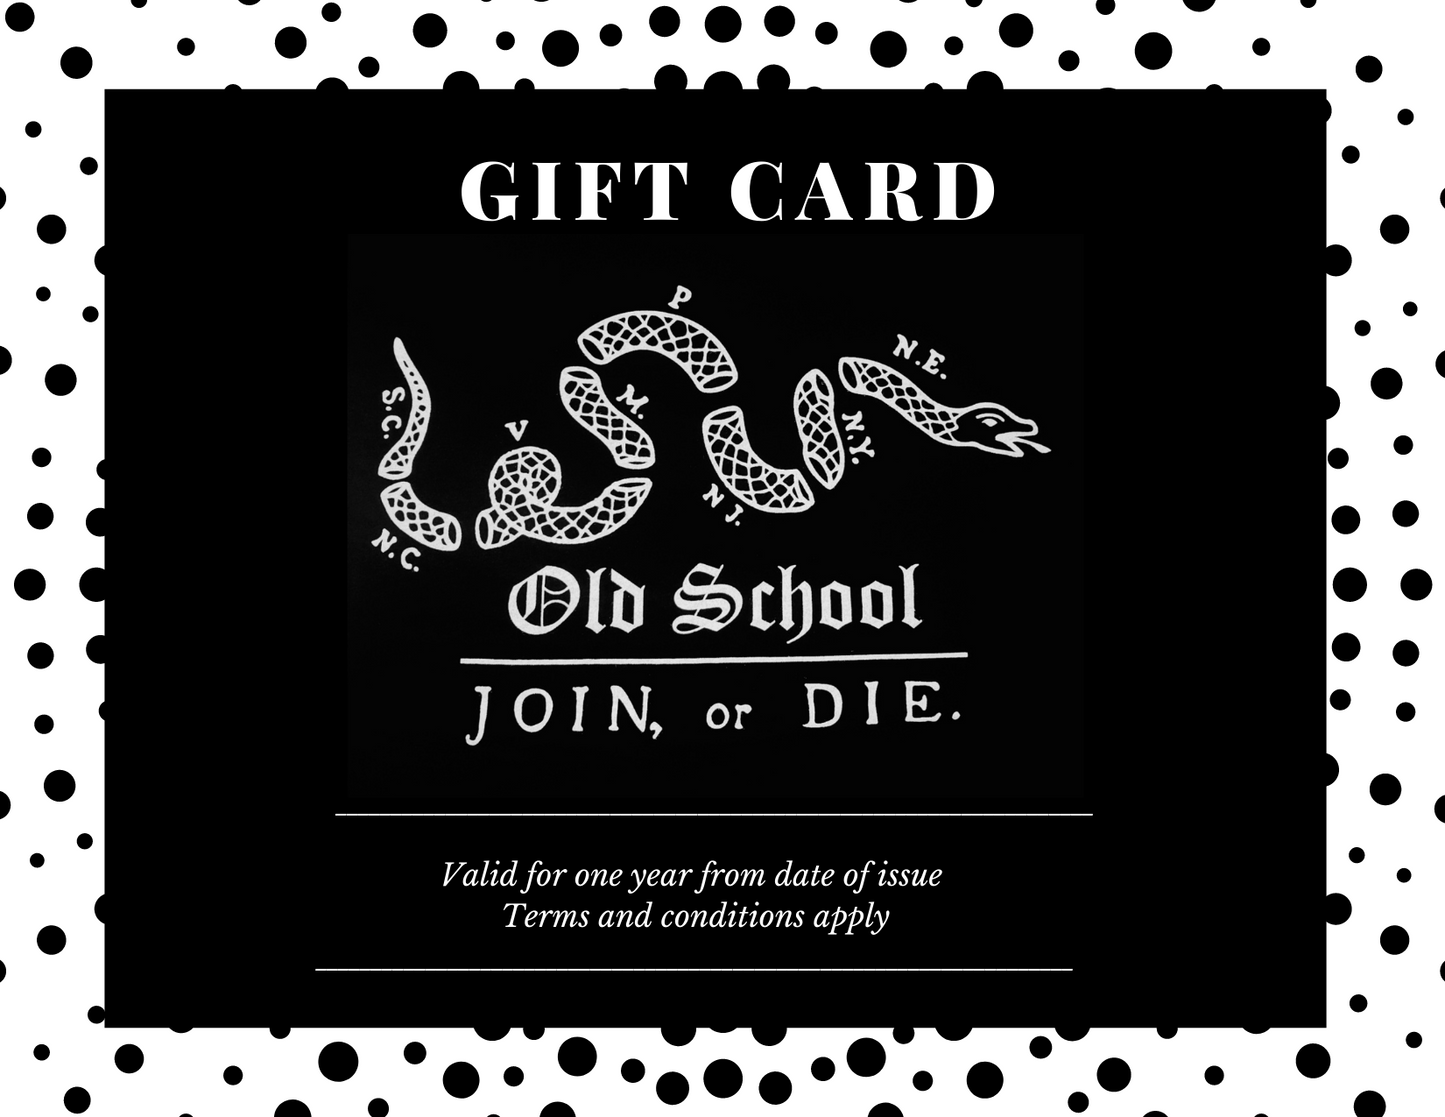 Old School Company Gift Card